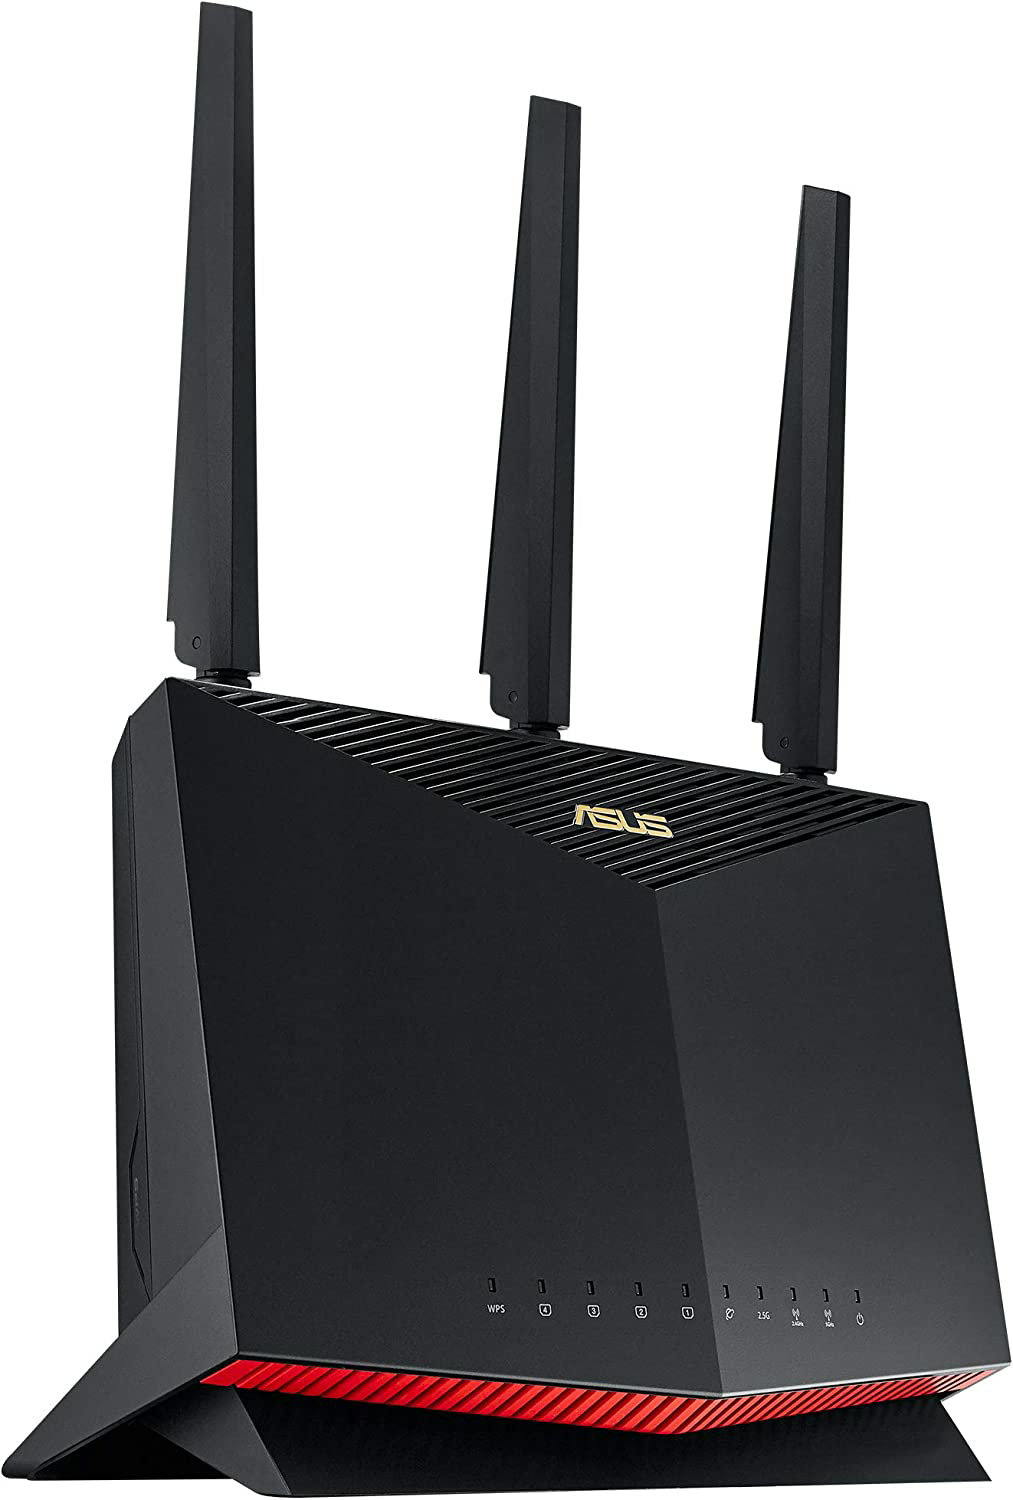 Amazon.com: ASUS AX5700 WiFi 6 Gaming Router (RT-AX86S) – Dual Band Gigabit Wireless Internet Router $199.99